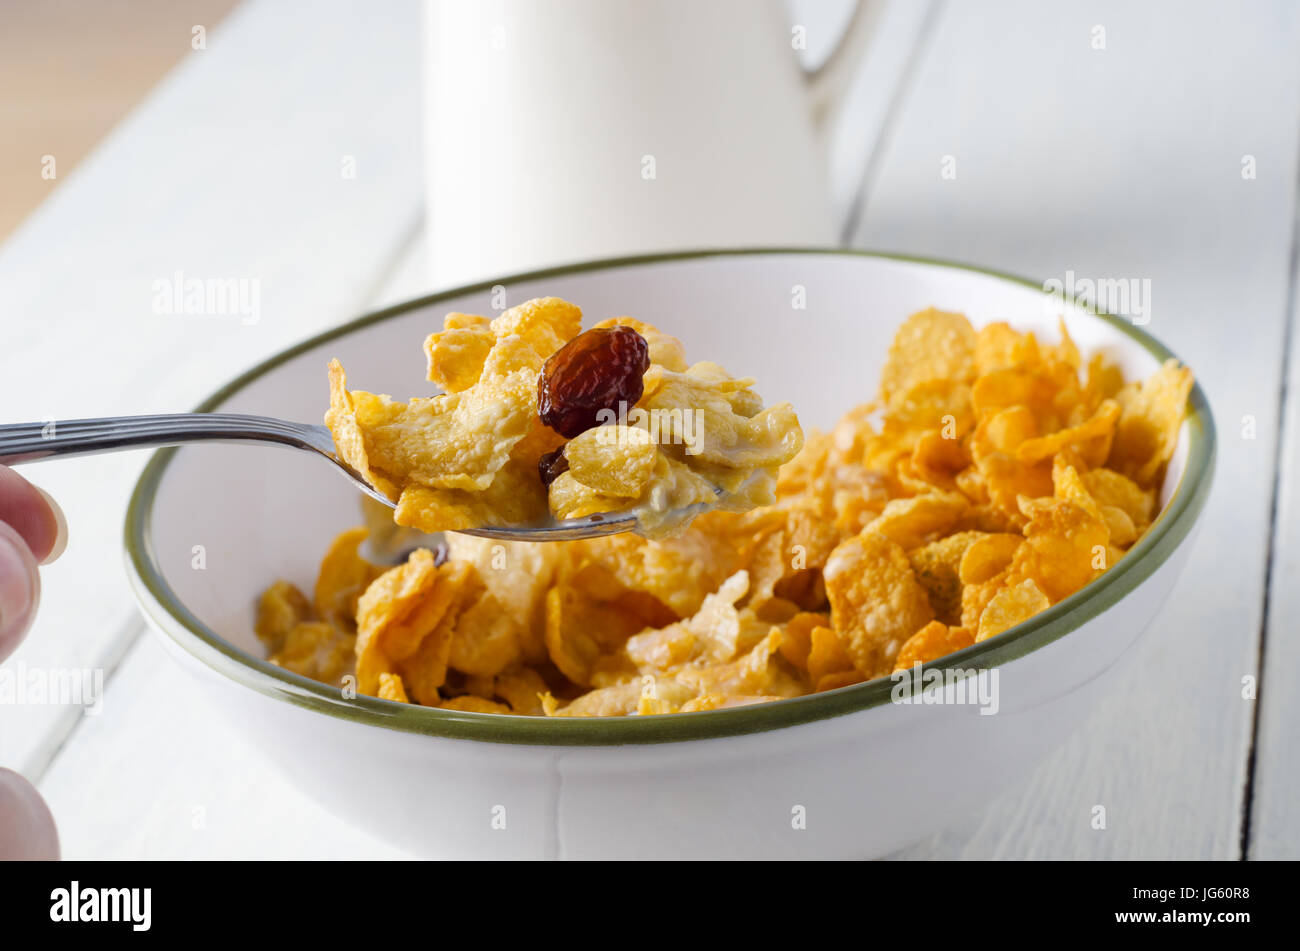 A hand lifting a spoonful of cornflakes and raisins from a white bowl with green rim, on a painted white wood planked table with milk jug in soft focu Stock Photo